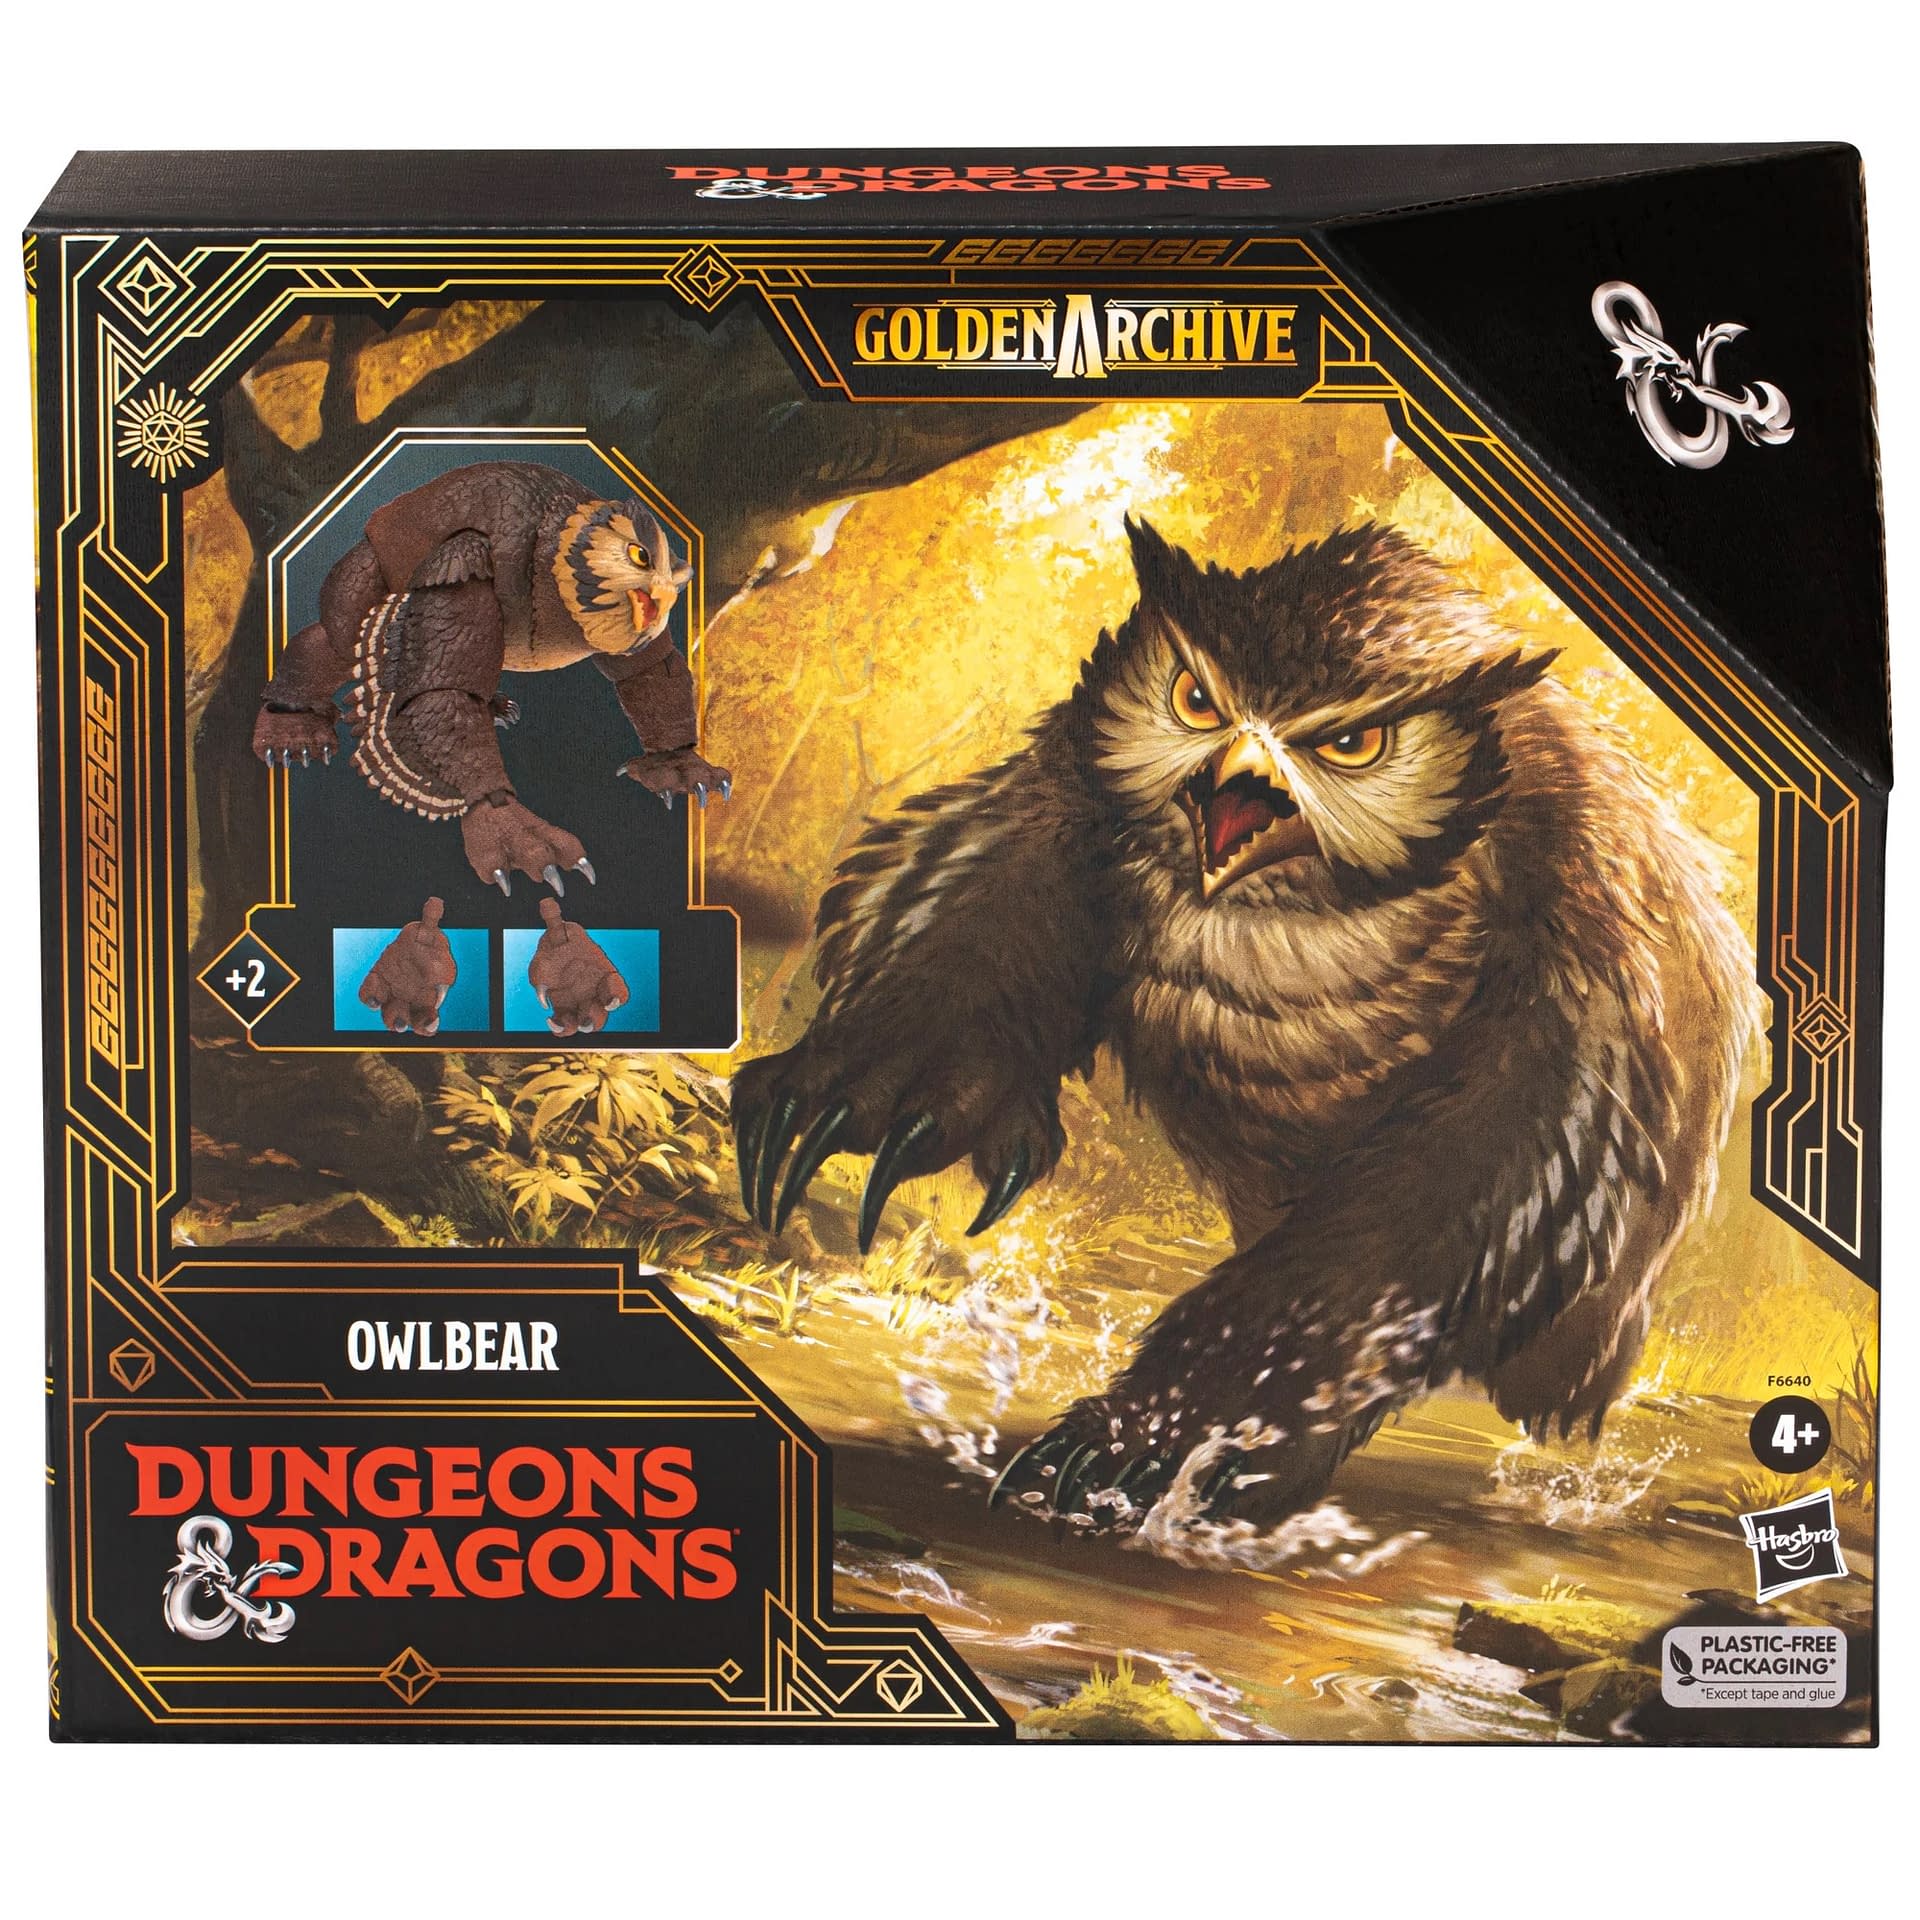 New Dungeons & Dragons Woodland Owlbear Arrives from Hasbro 